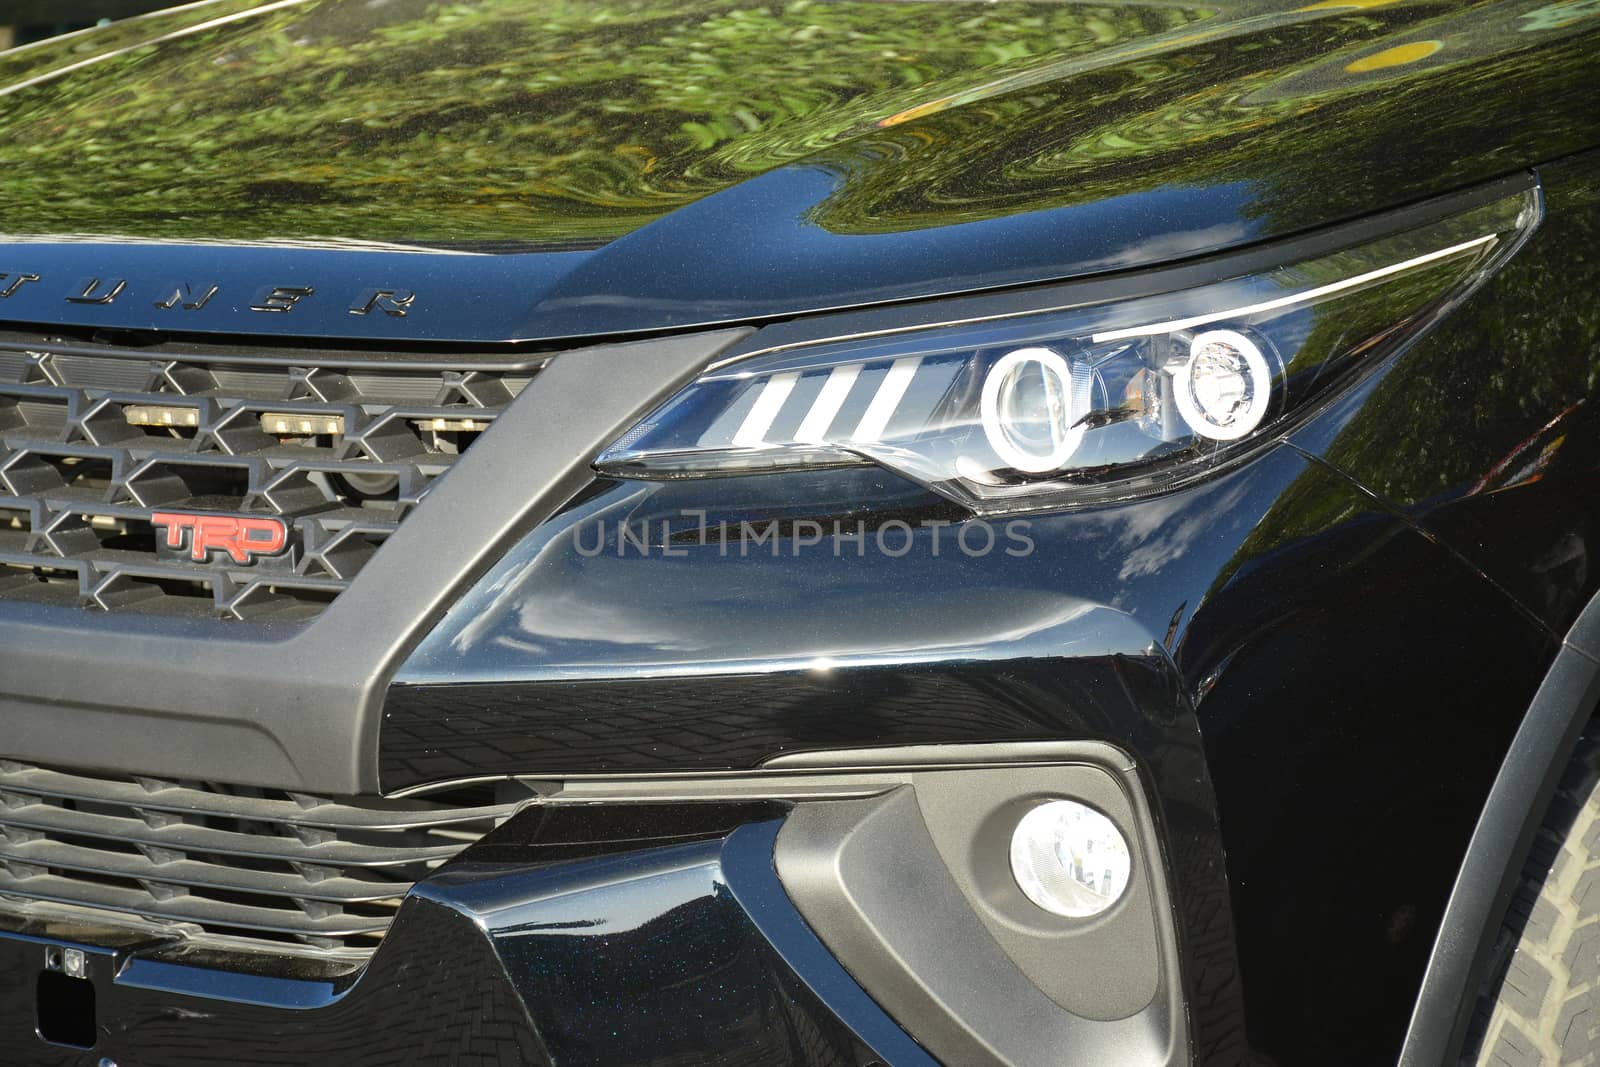 Toyota fortuner suv headlight at Bumper to Bumper car show in Pa by imwaltersy